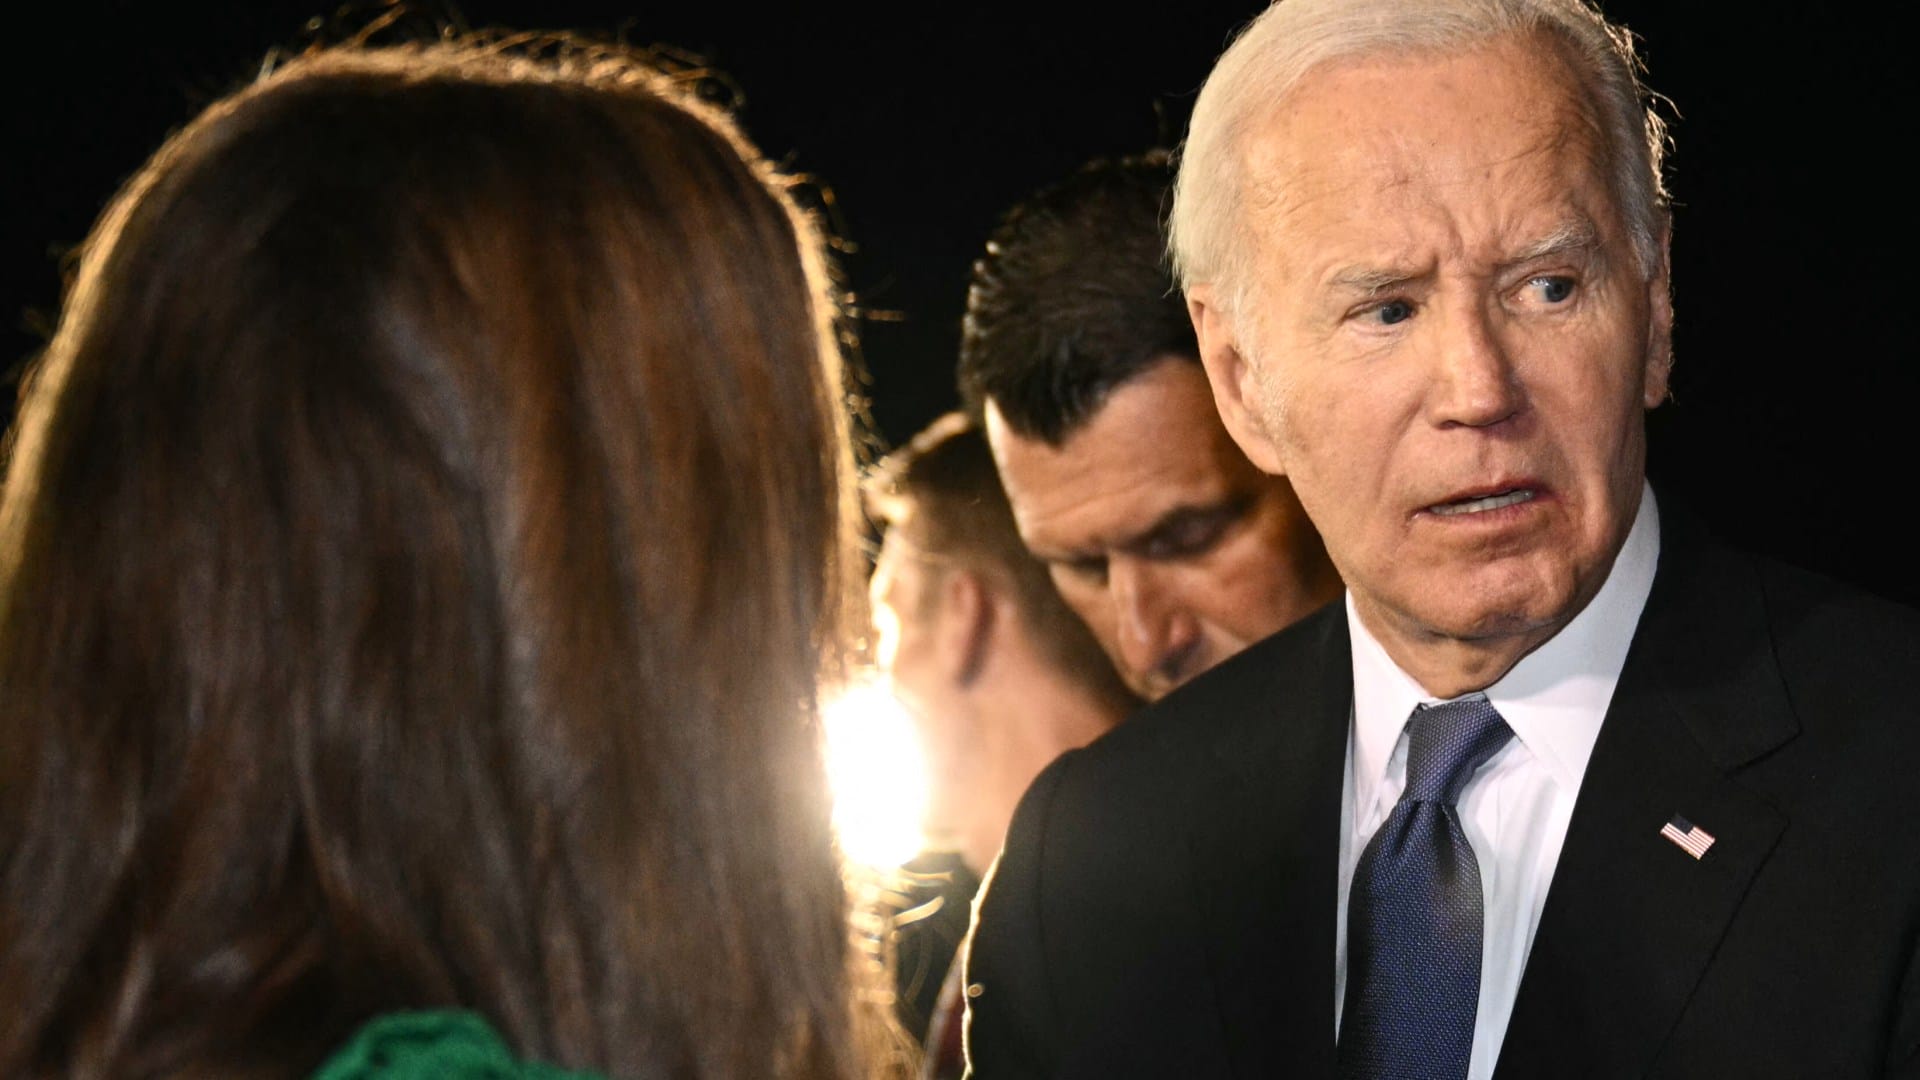 Joe Biden is not dropping out & wants 2nd debate despite crescendo of calls saying it's 'patriotic duty' to step aside